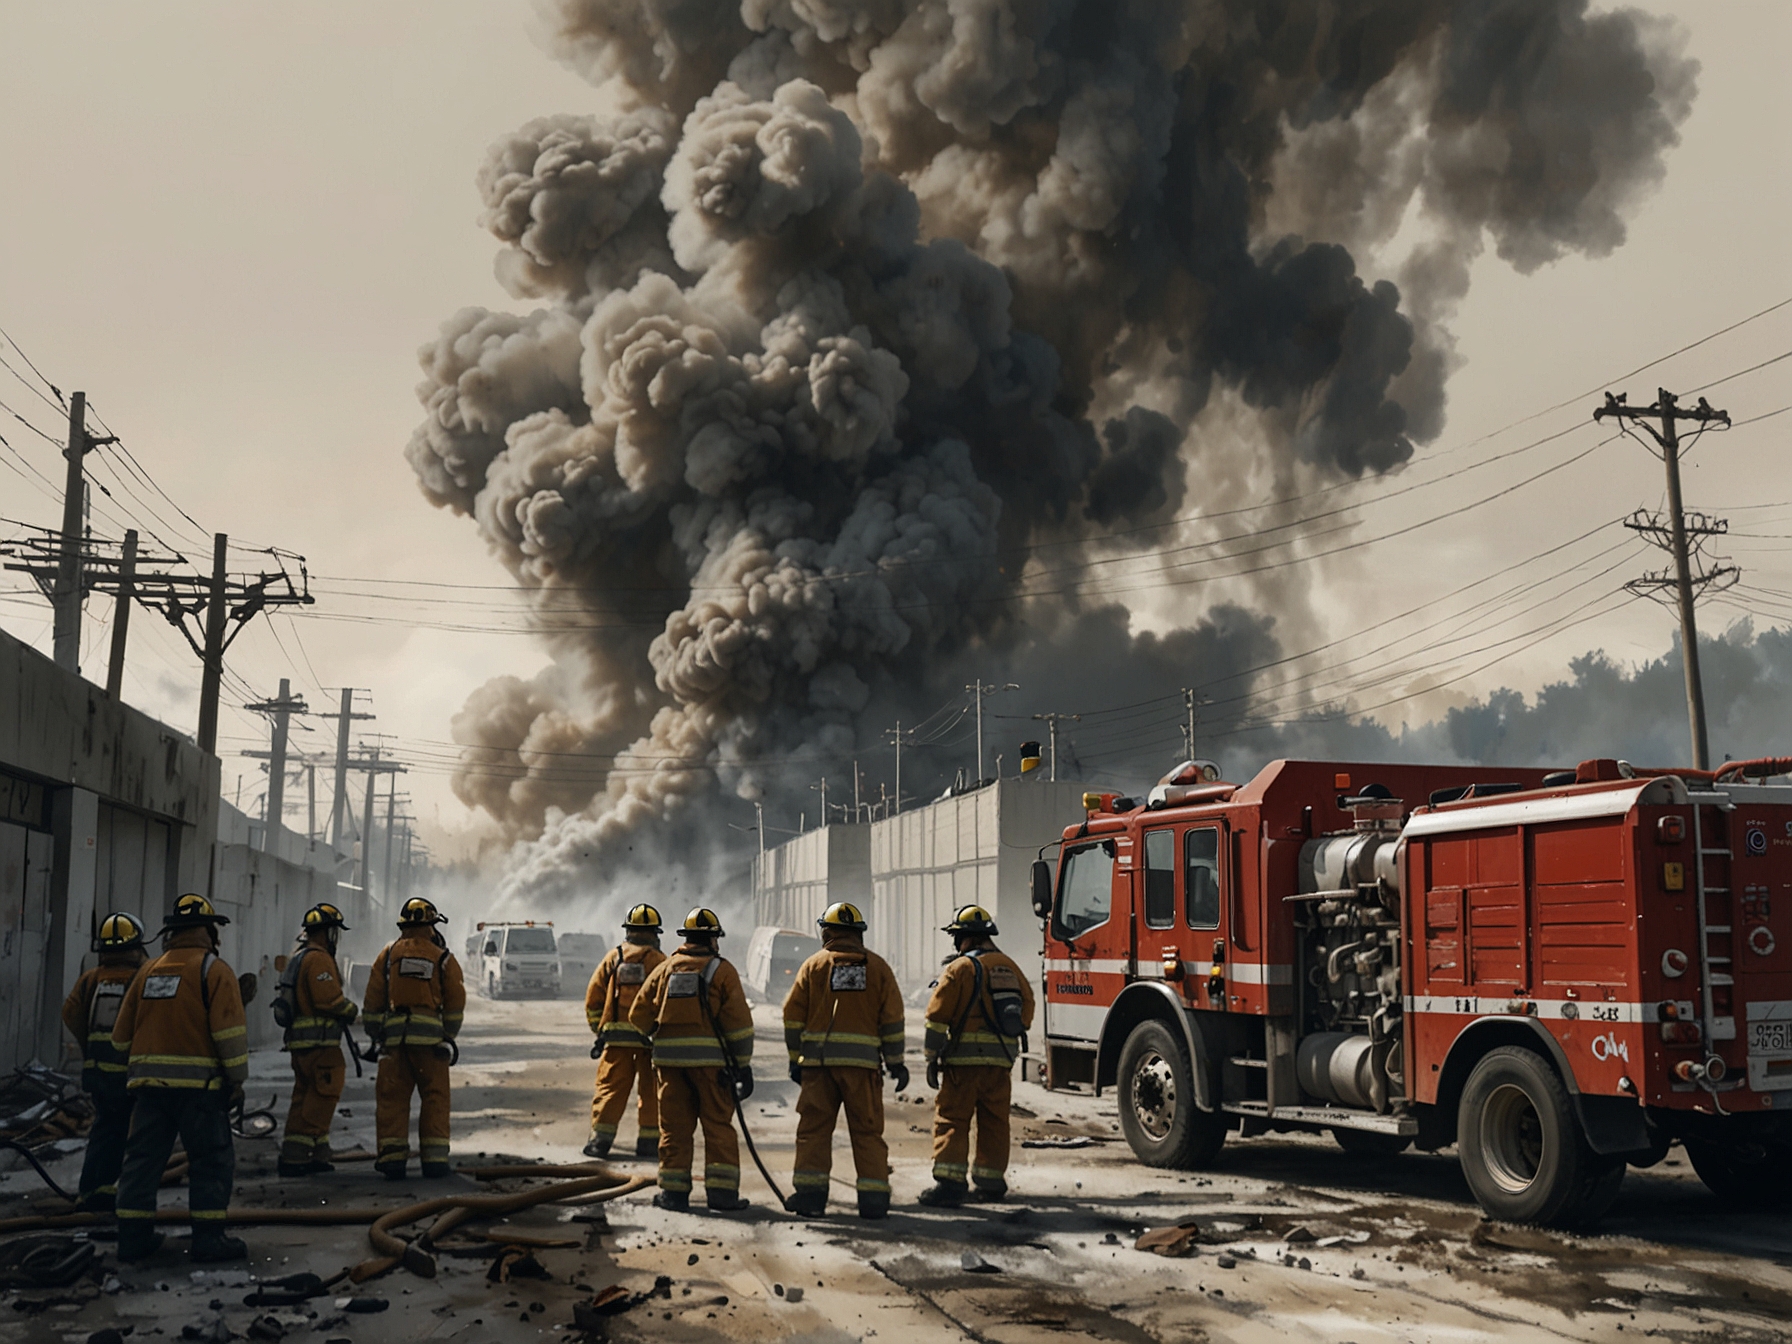 Firefighters battling thick plumes of smoke at a South Korean lithium battery plant while emergency response teams work to contain the devastating blaze.